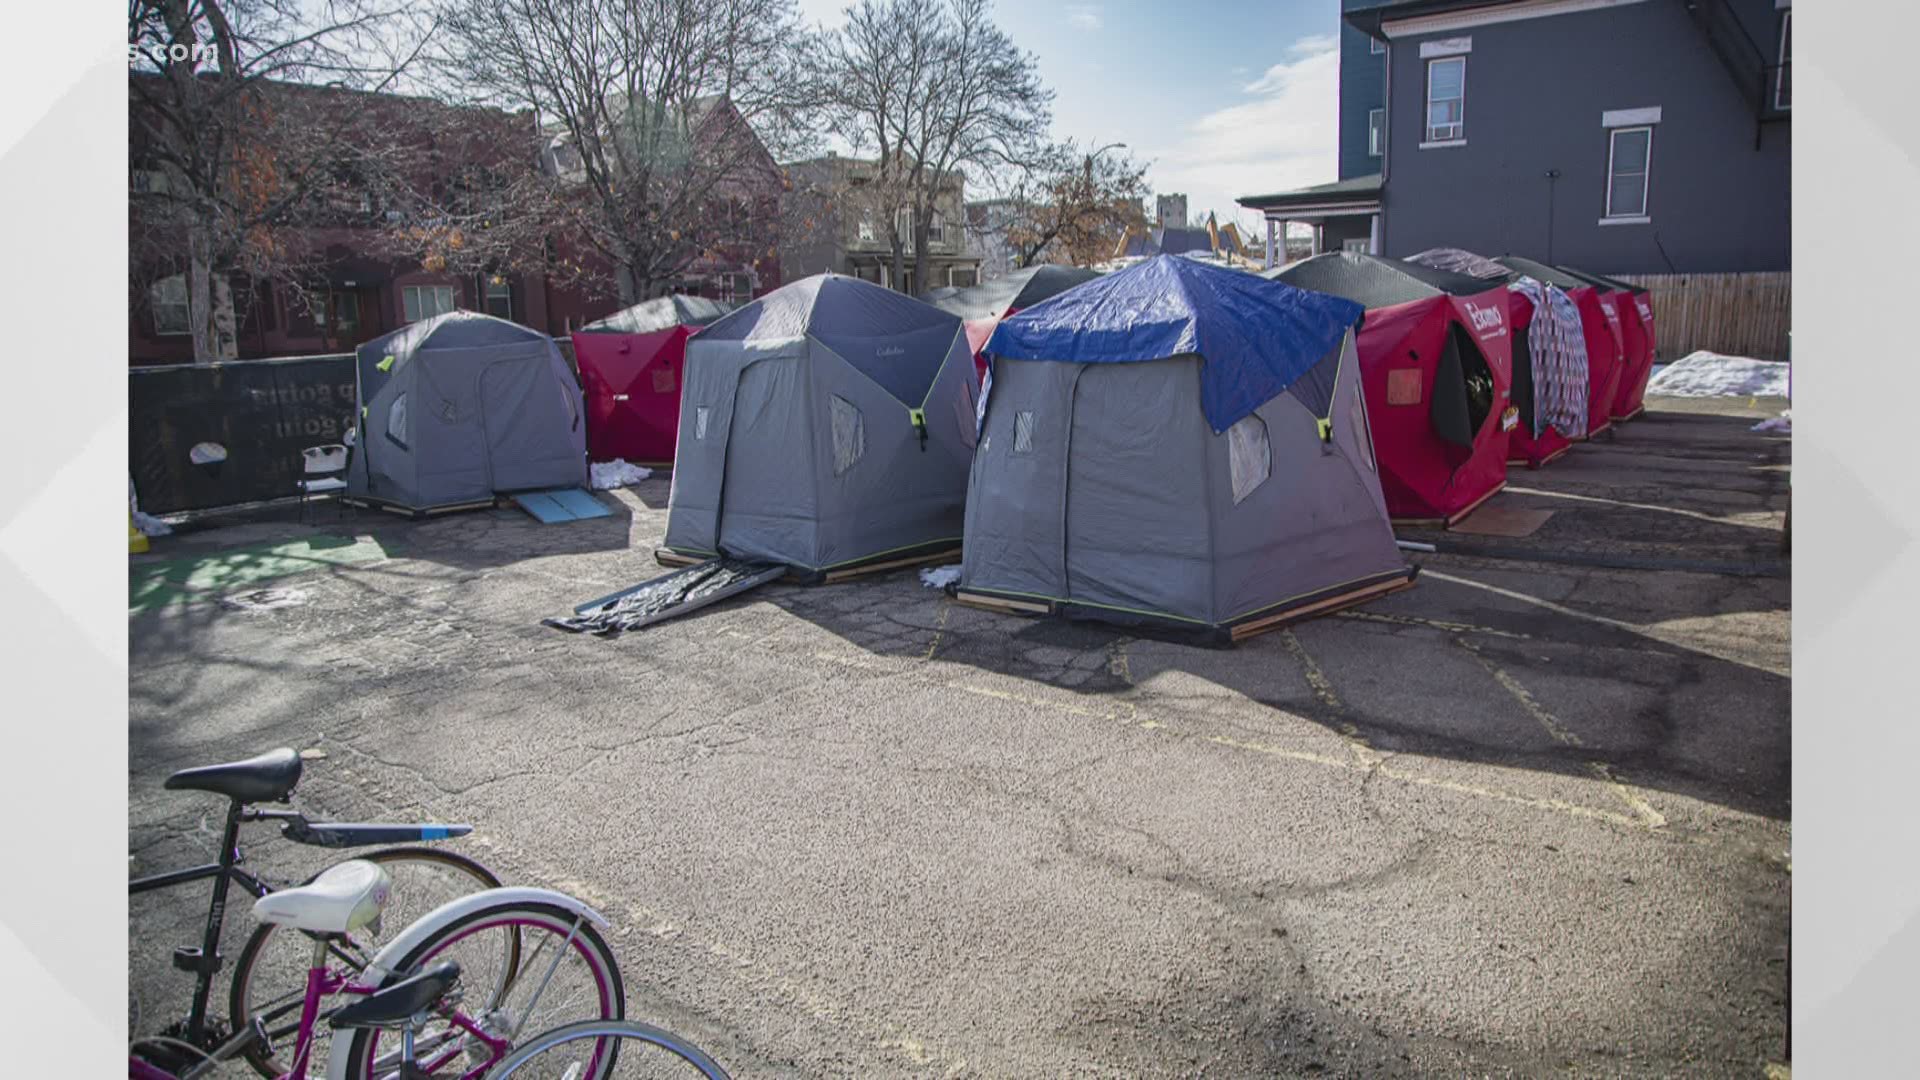 Denver will soon open its newest safe outdoor space for people experiencing homelessness at Regis University's Northwest Denver campus.